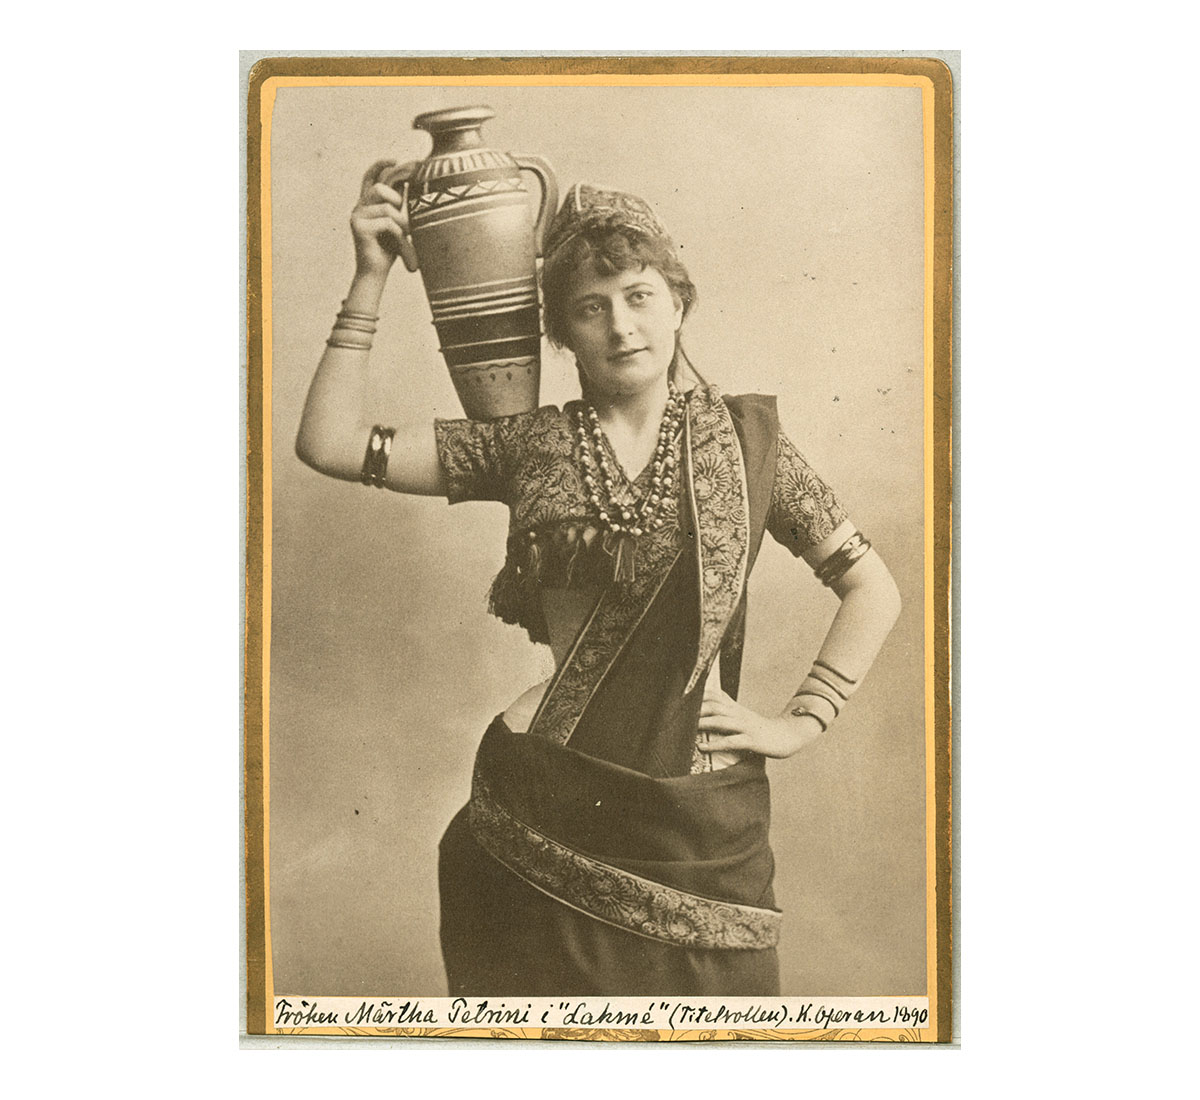 A photograph of a woman in a saree and blouse holding up an urn on her right shoulder.